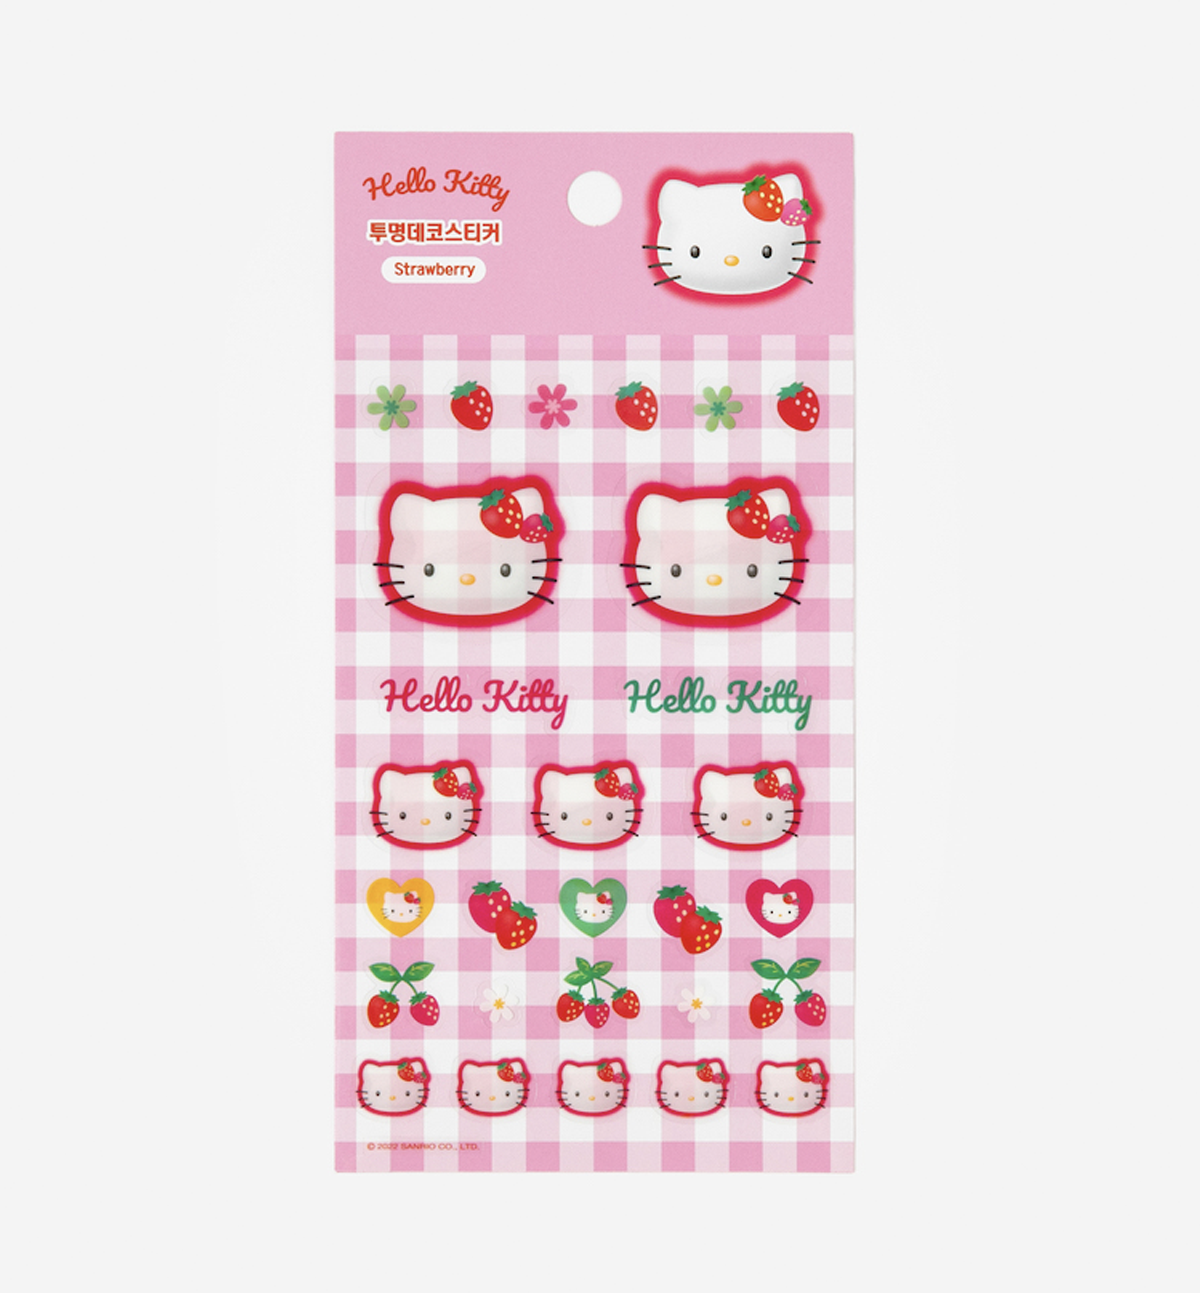 Hello Kitty Sanrio Sticker Book Lot of 3 Stickers missing